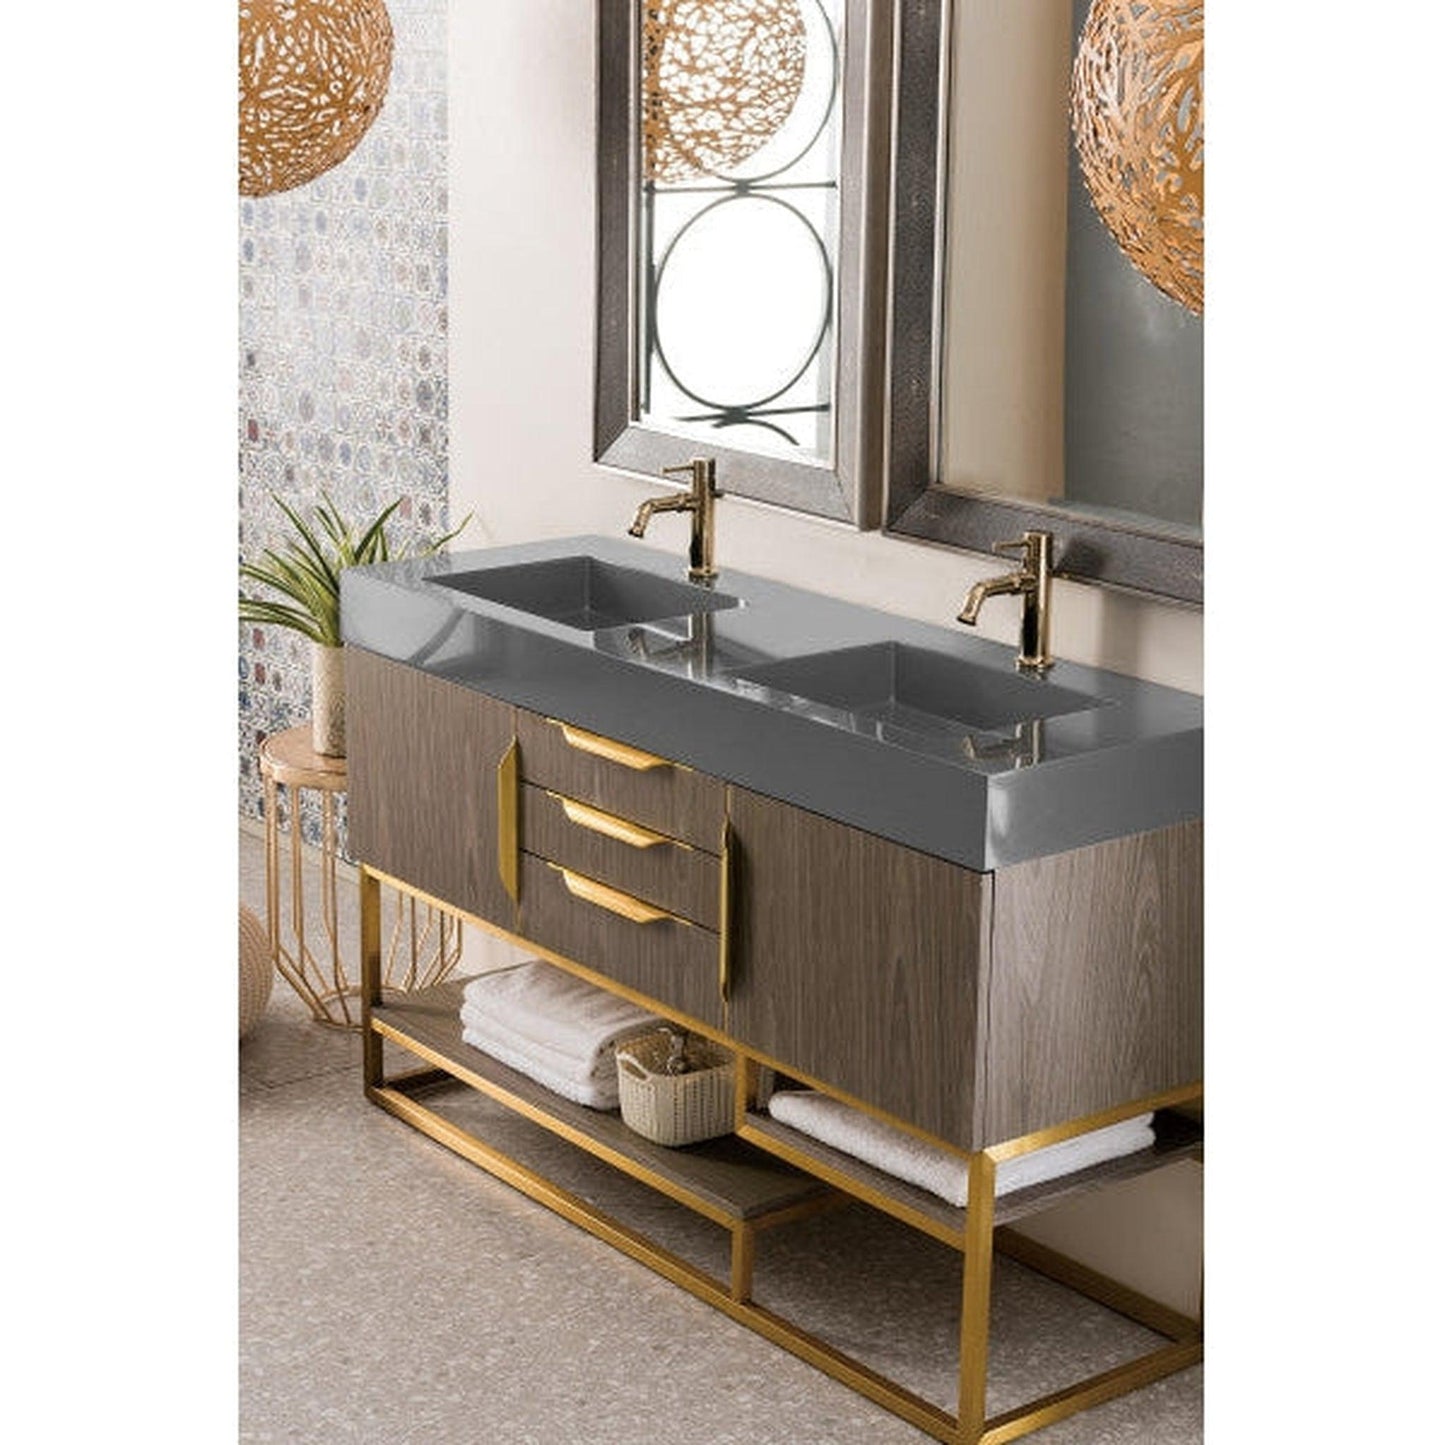 James Martin Columbia 59" Double Ash Gray Bathroom Vanity With Radiant Gold Hardware and 6" Glossy Dusk Gray Composite Countertop